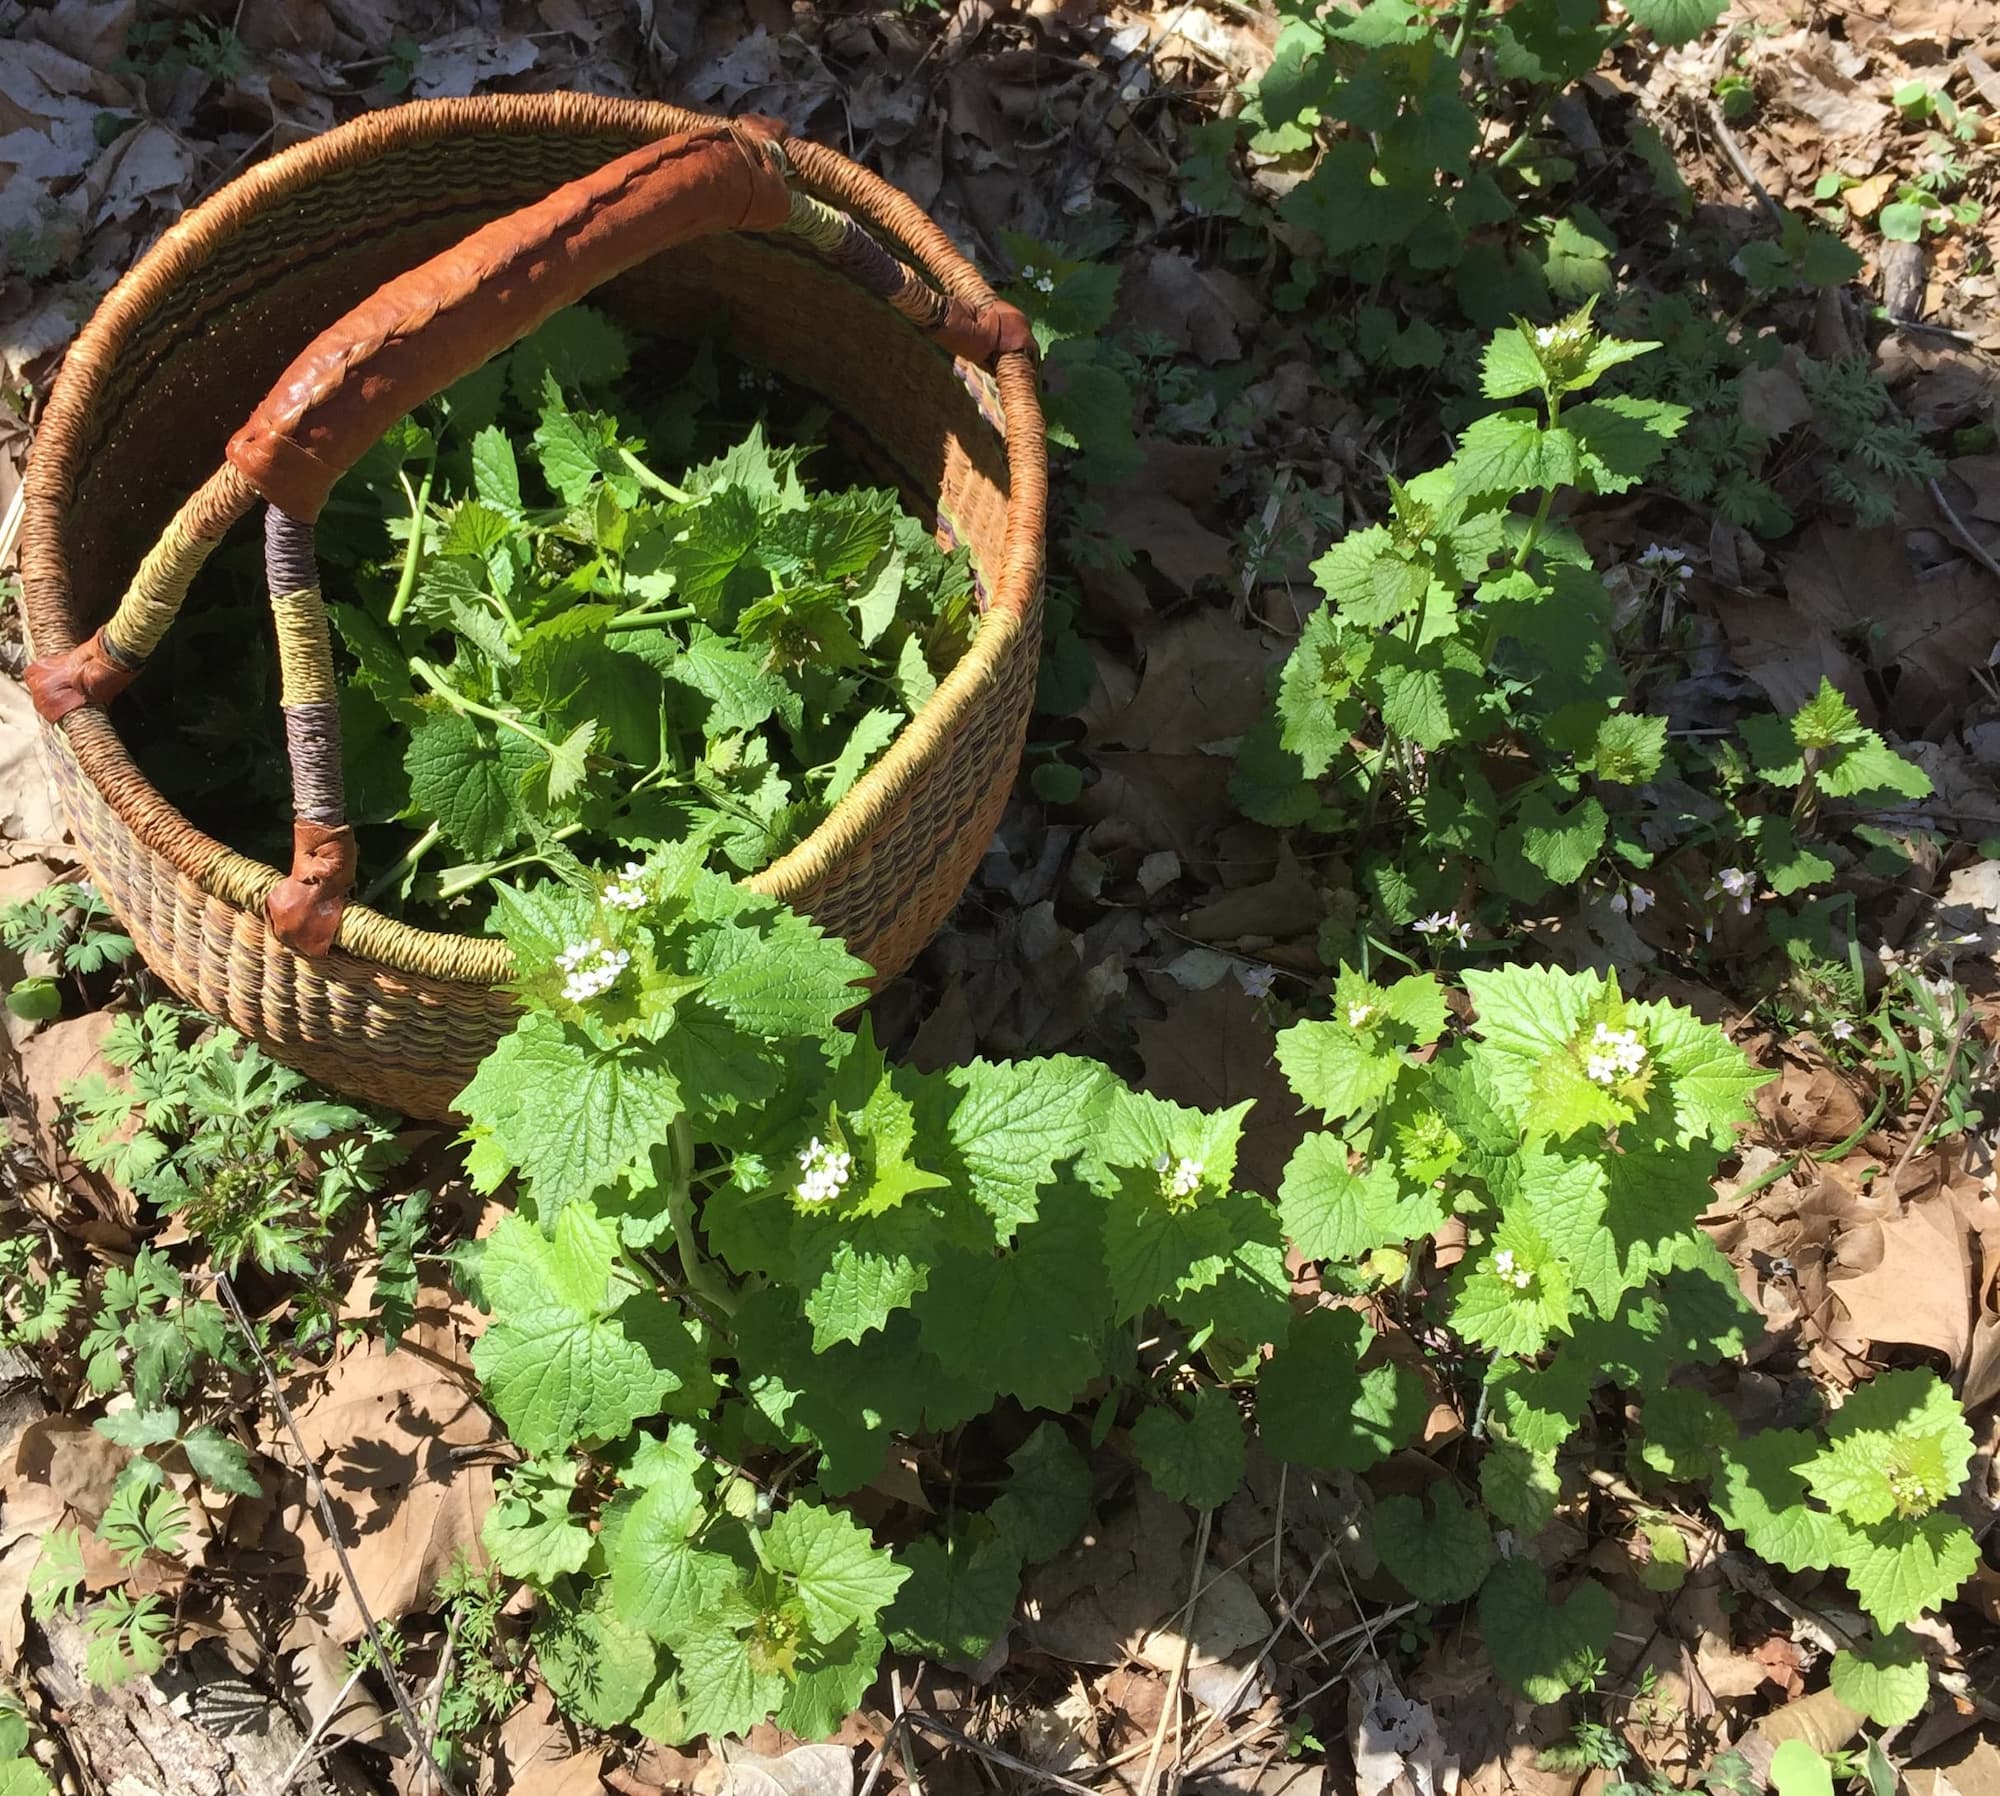 Garlic mustard shoots are simple to gather and not yet too bitter when they just begin to bloom.